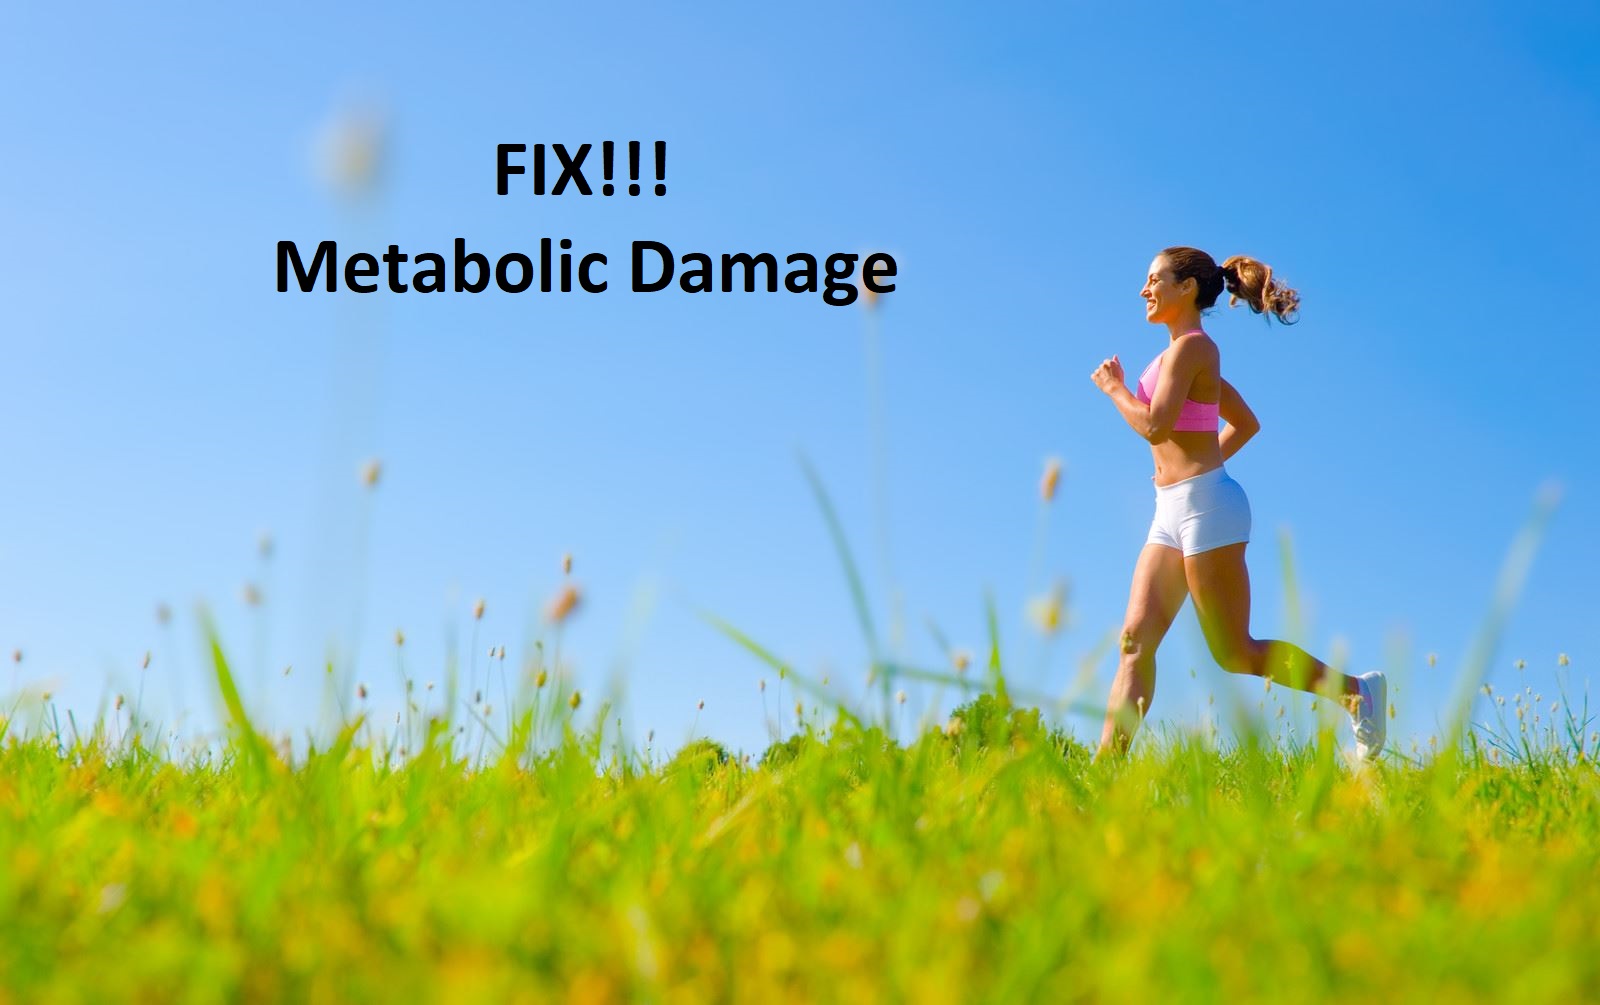 How to Fix Metabolic Damage in the Body?